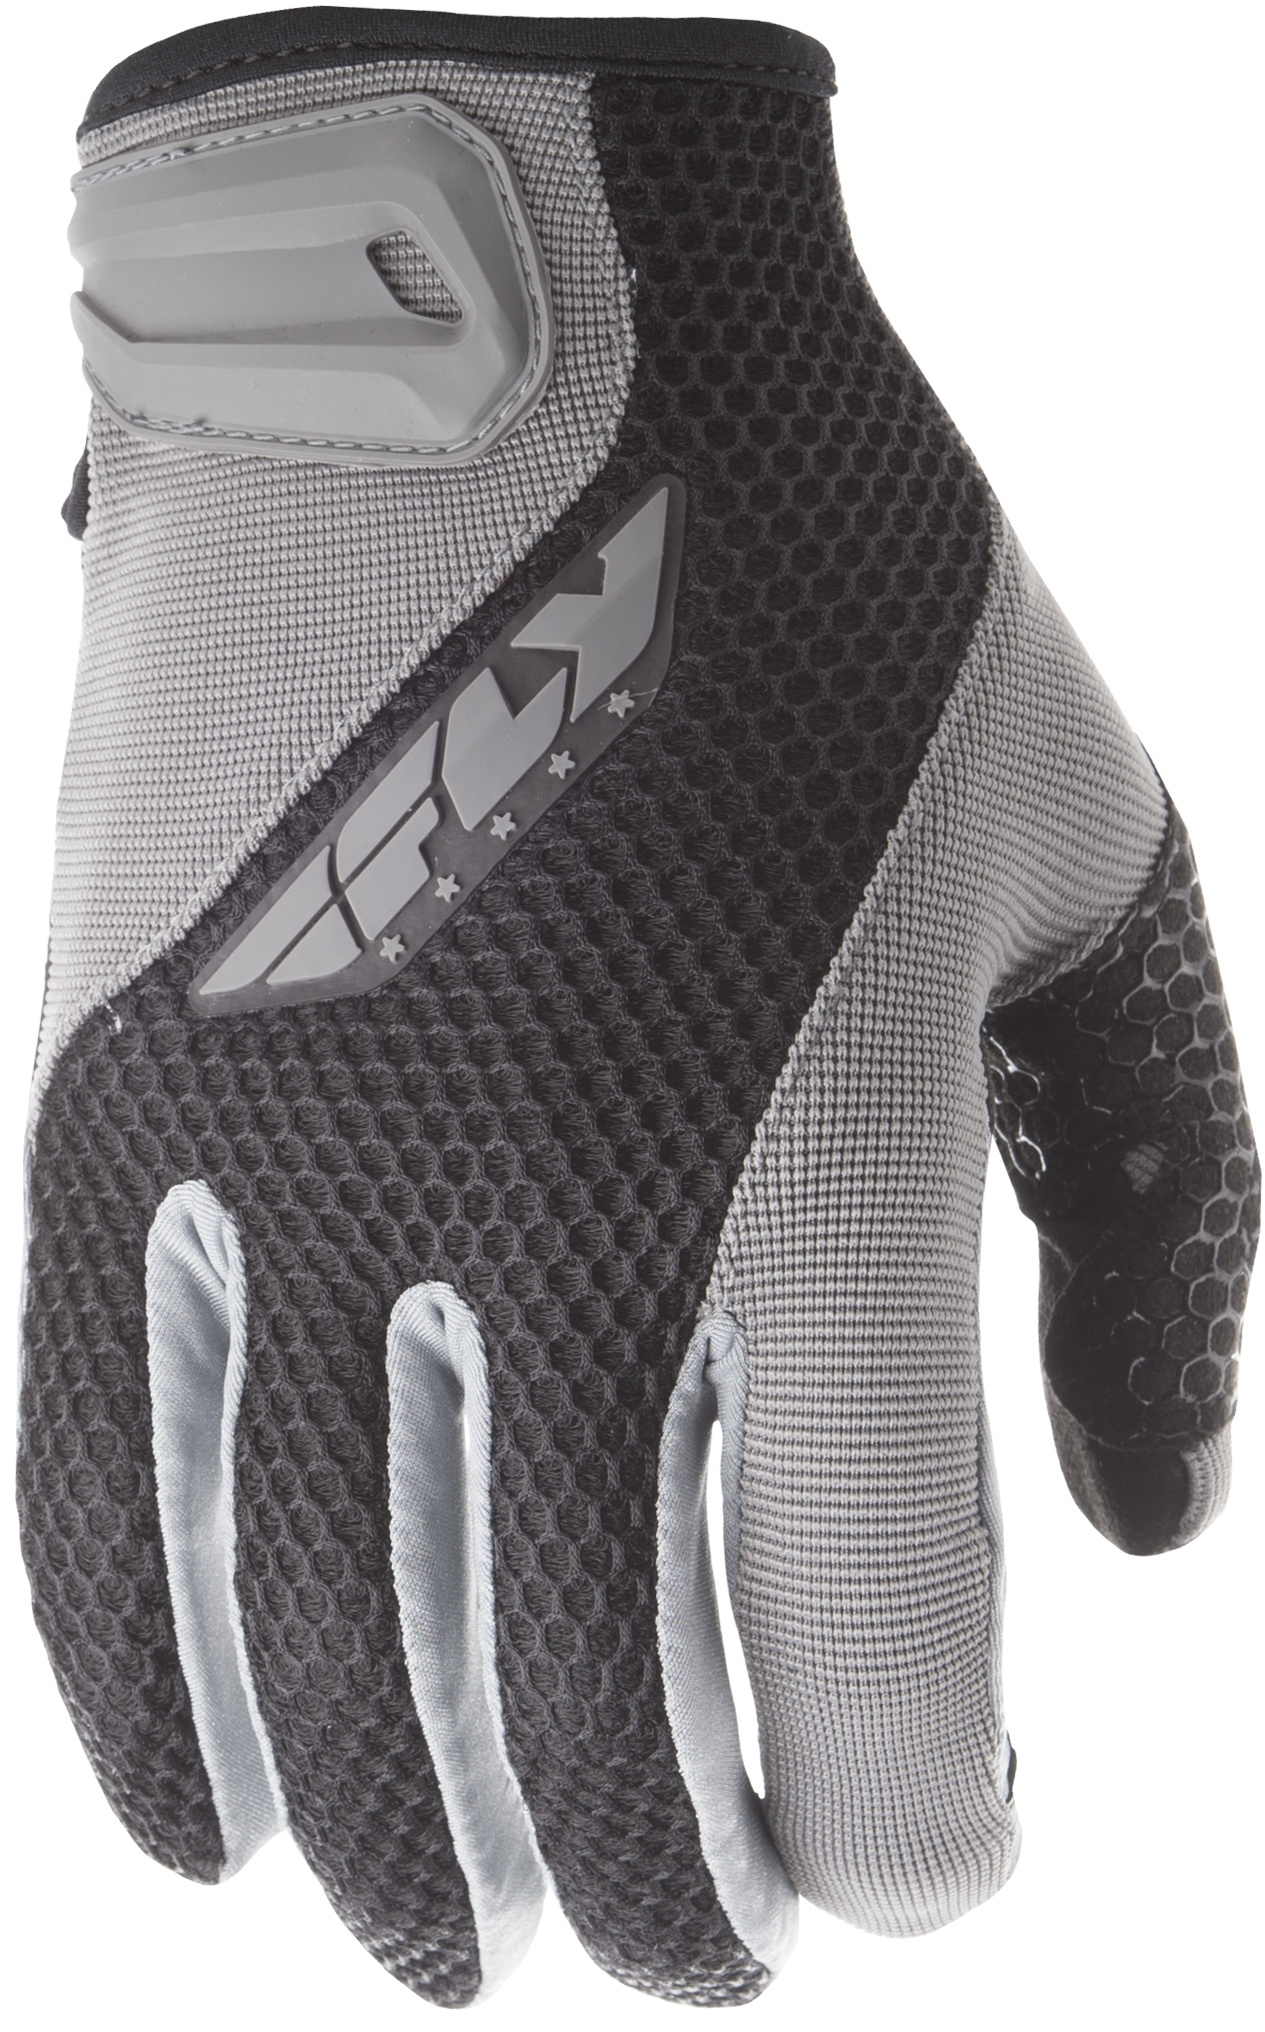 Fly Racing - Coolpro Gloves - #5884 476-4023~5